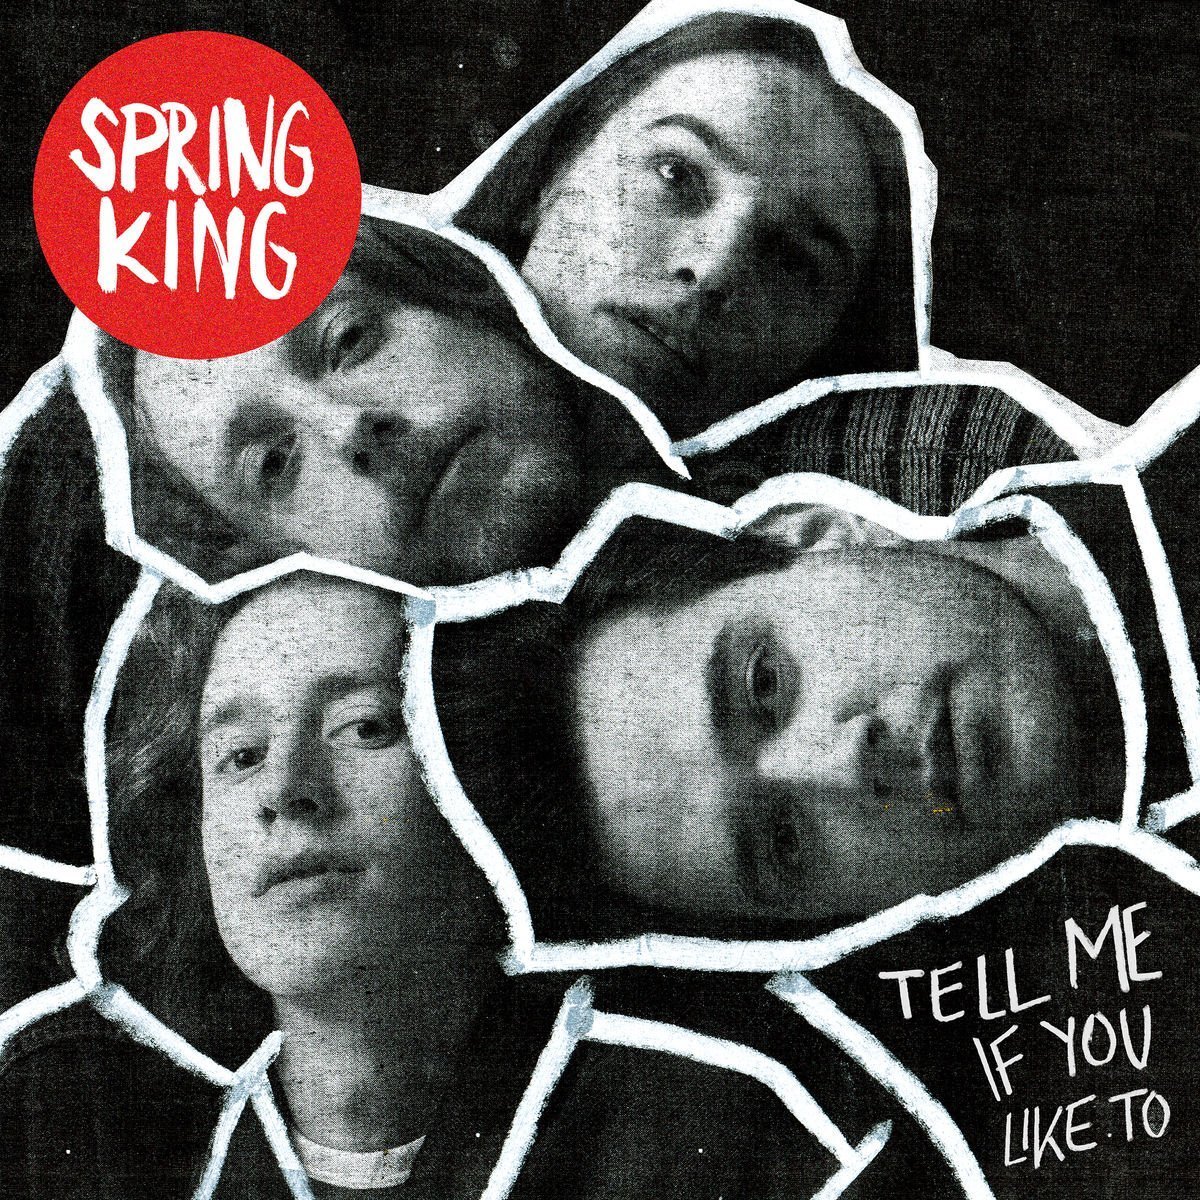 Spring King – Tell Me If You Like To – Relève de Manchester assurée